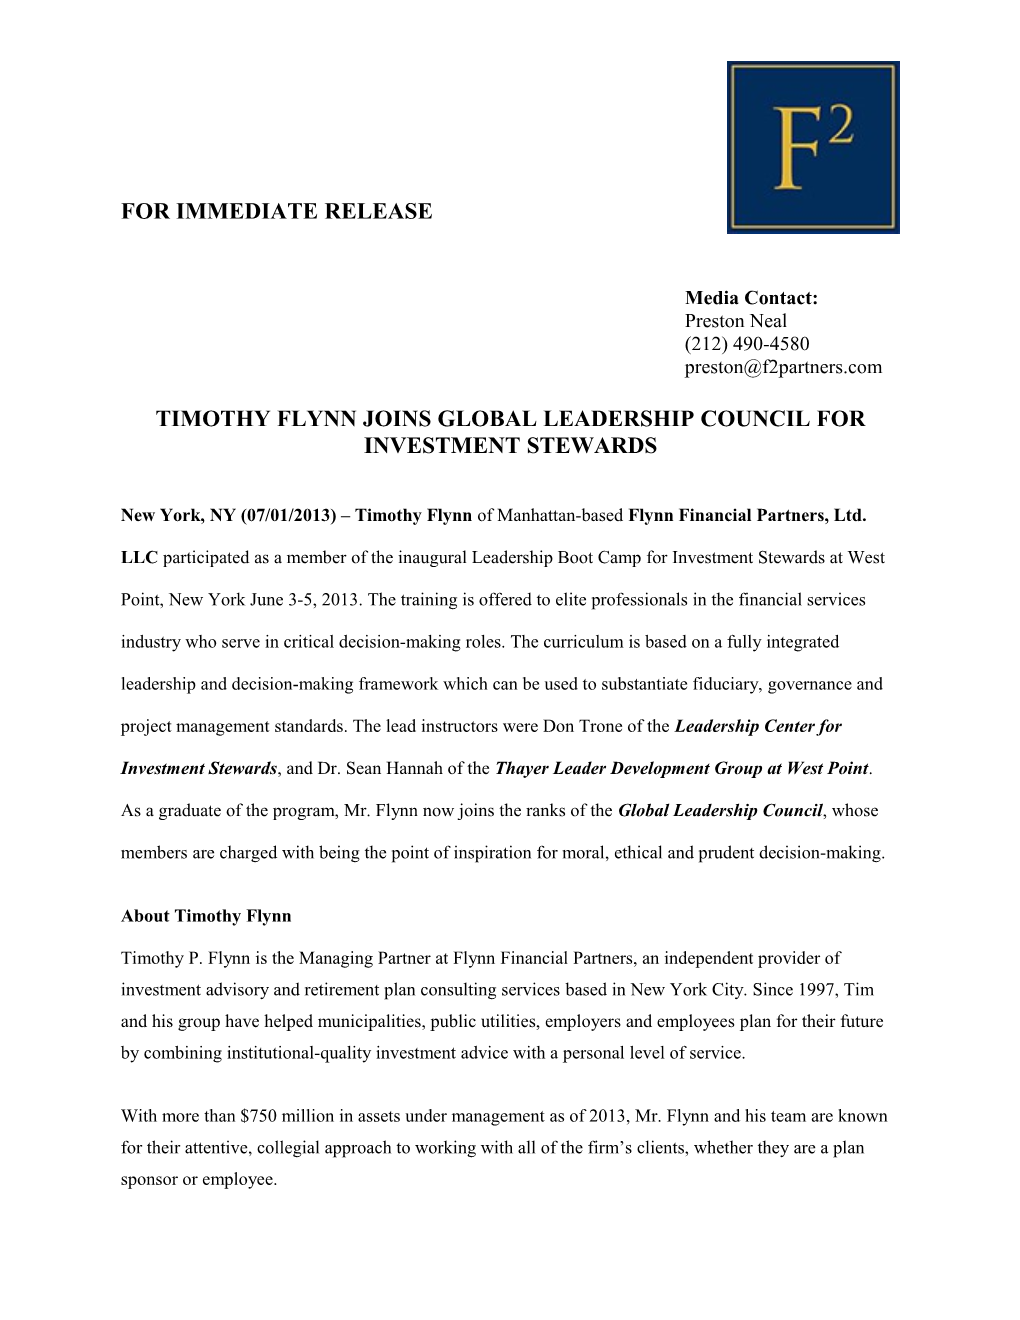 Timothy Flynn Joins Global Leadership Council for Investment Stewards